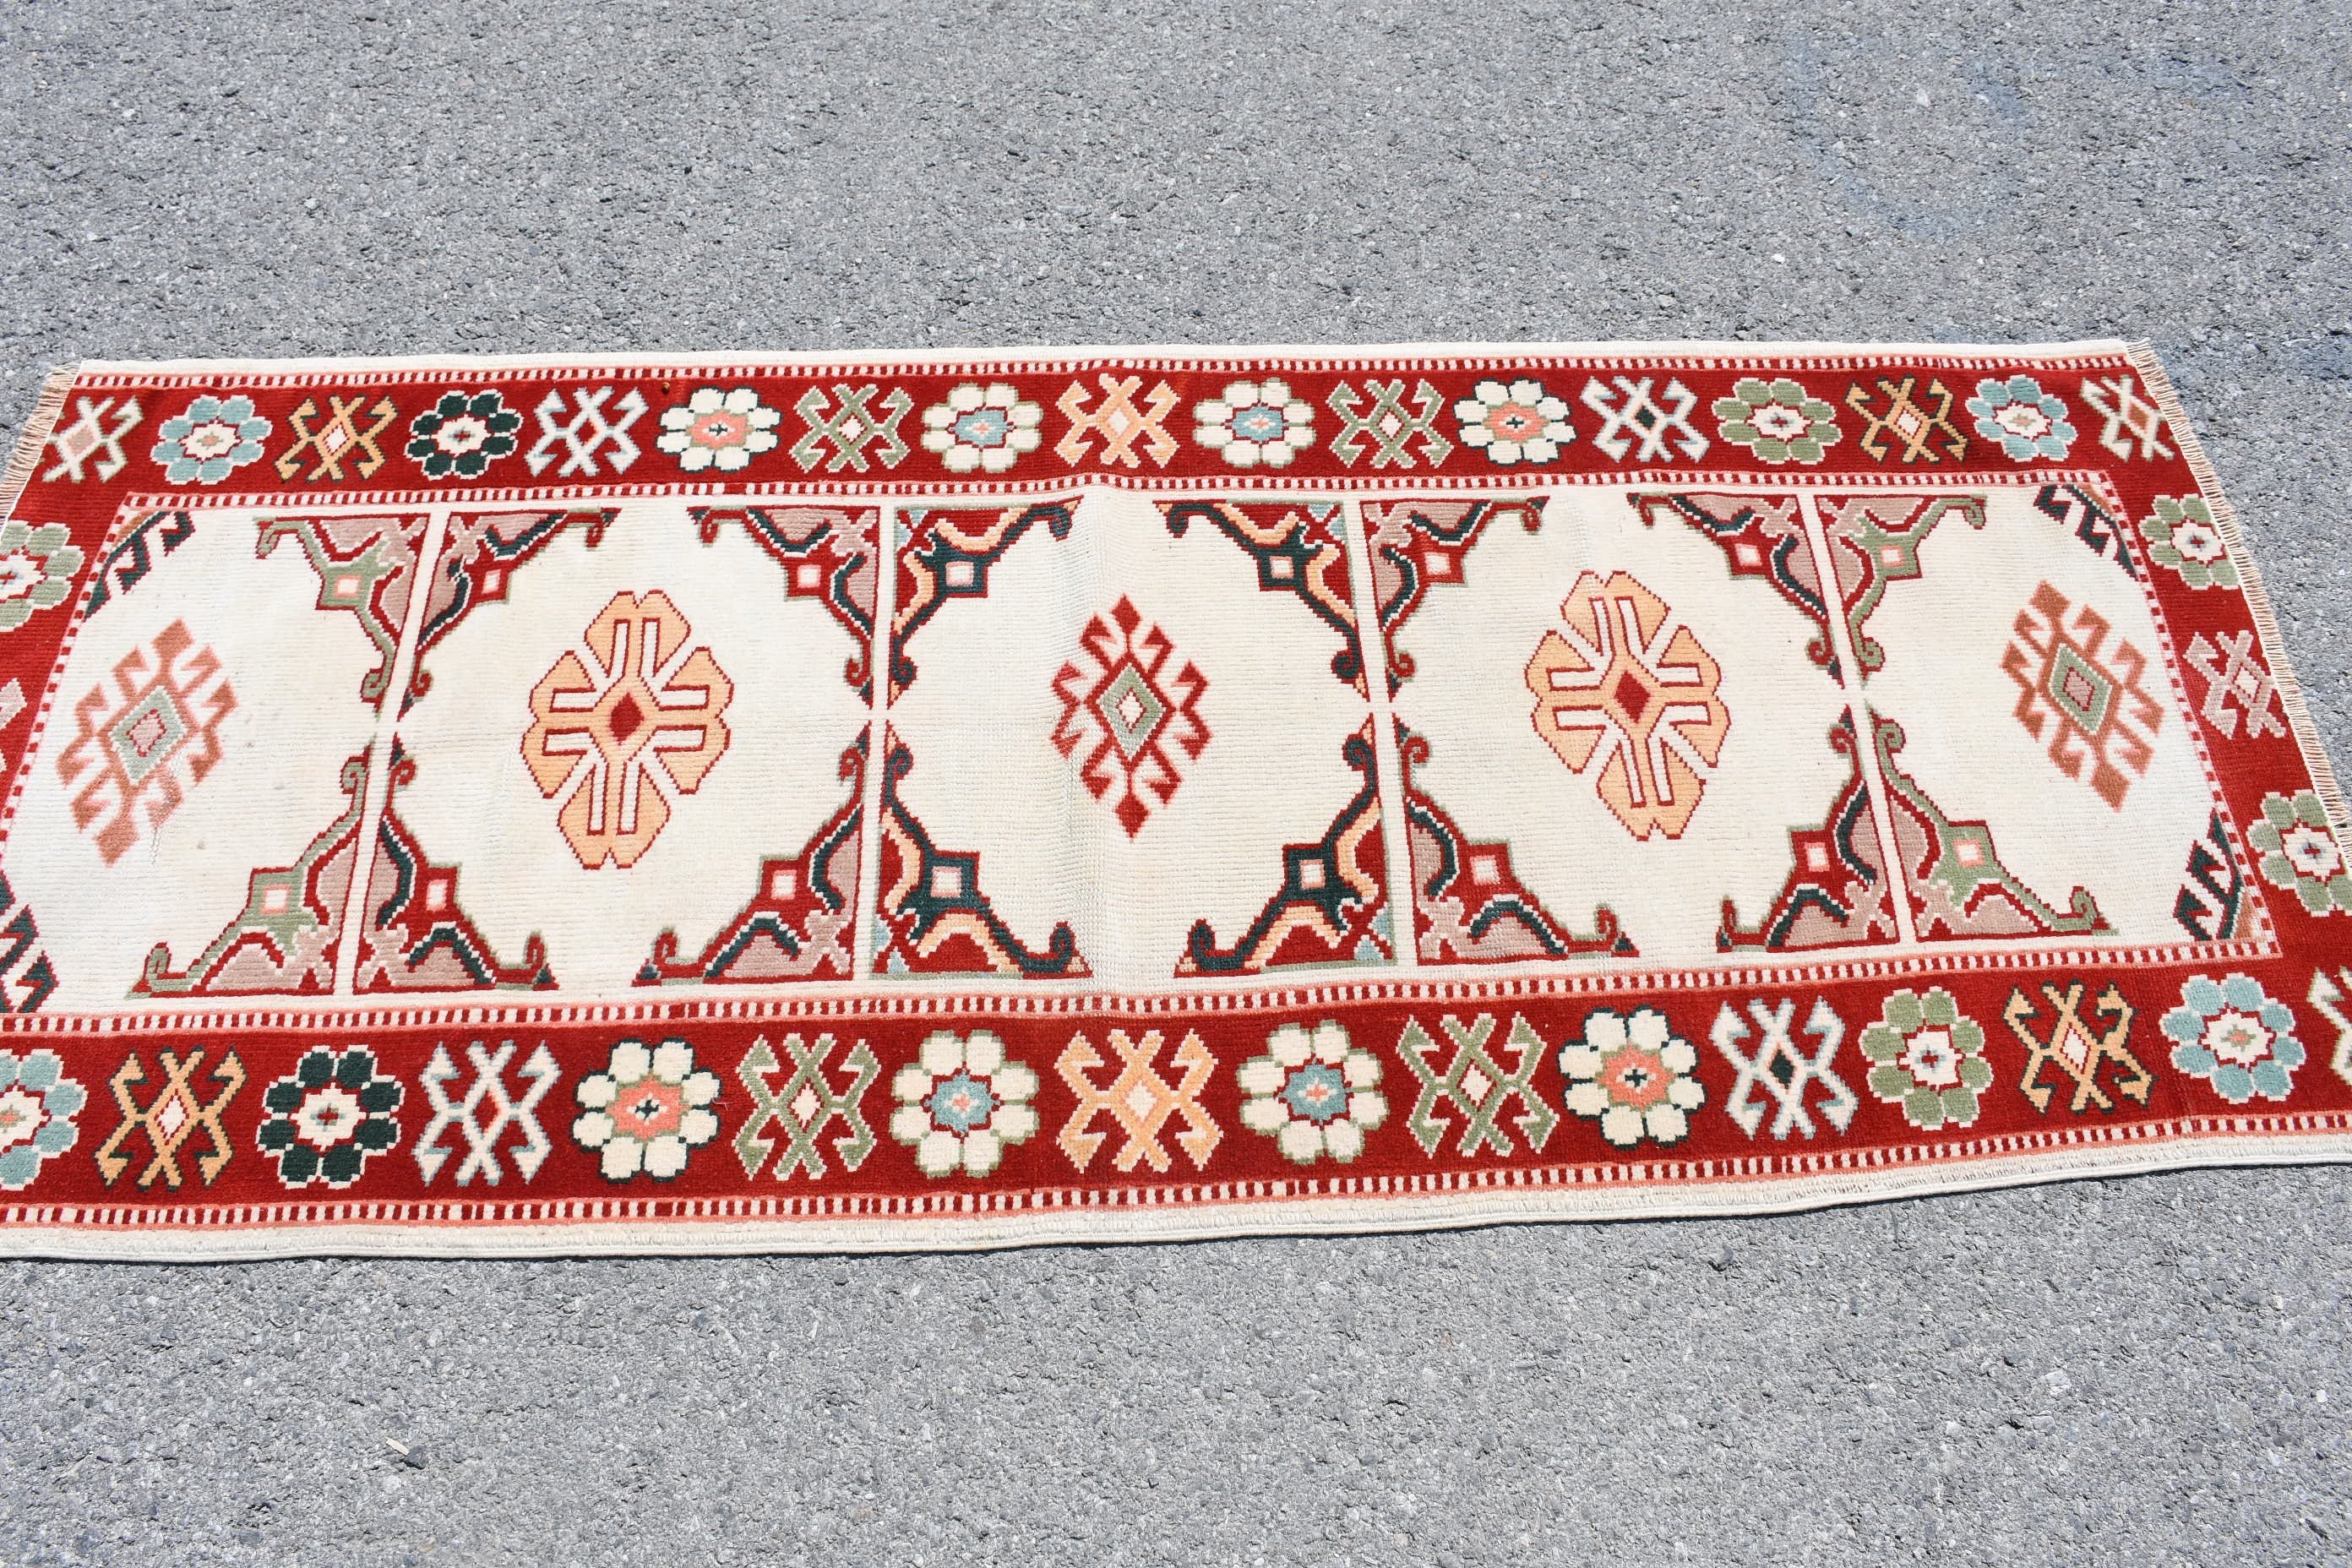 2.6x6.2 ft Accent Rugs, Turkey Rugs, Vintage Rugs, Rugs for Entry, Turkish Rug, Red Oriental Rug, Entry Rug, Bedroom Rug, Oushak Rug